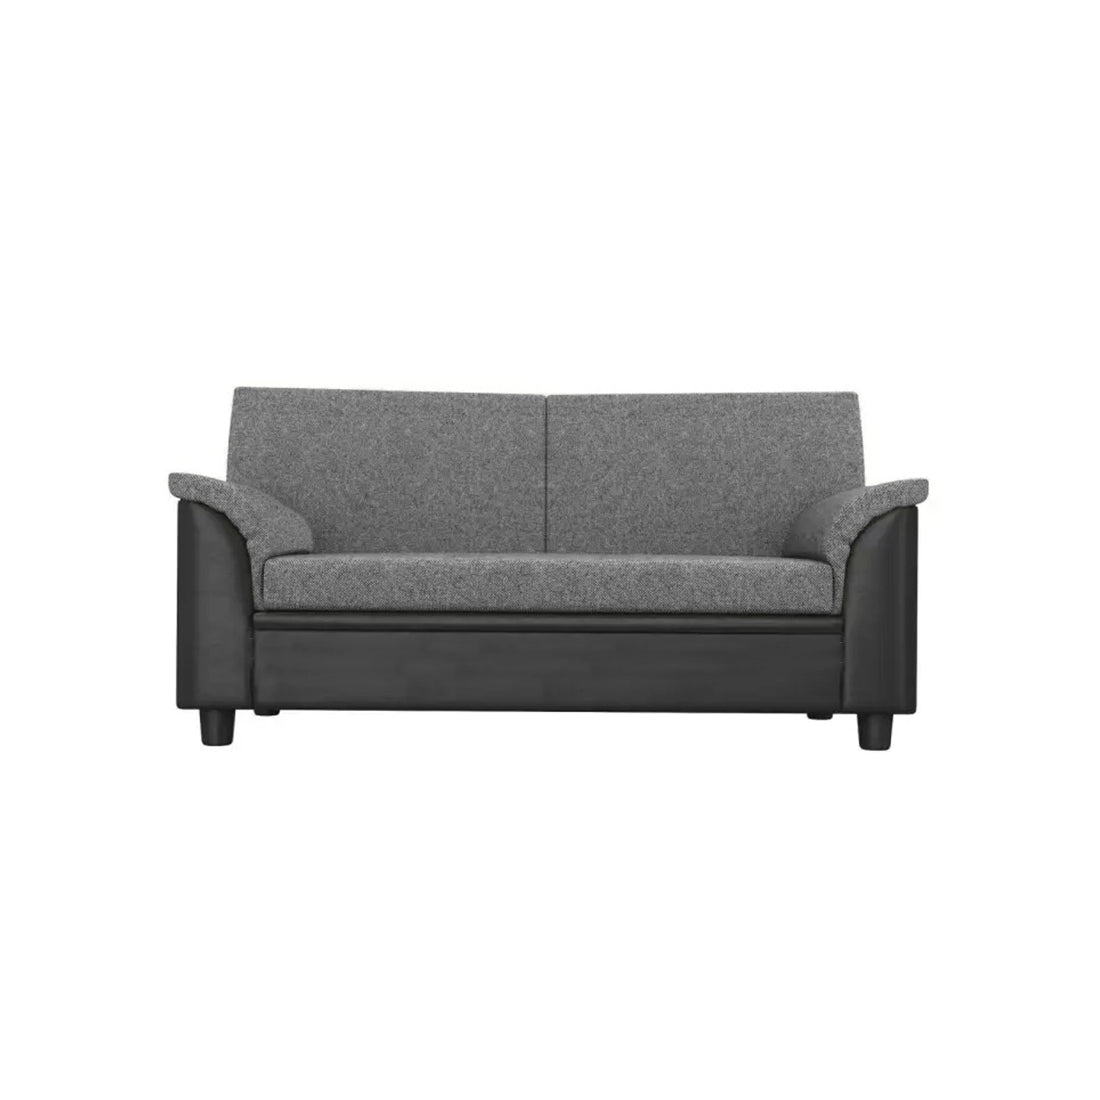 Torque India Hensley 3 Seater Fabric Sofa | Furniture for Living Room And Office | Grey & Black | 3 Seater Fabric Sofa - TorqueIndia